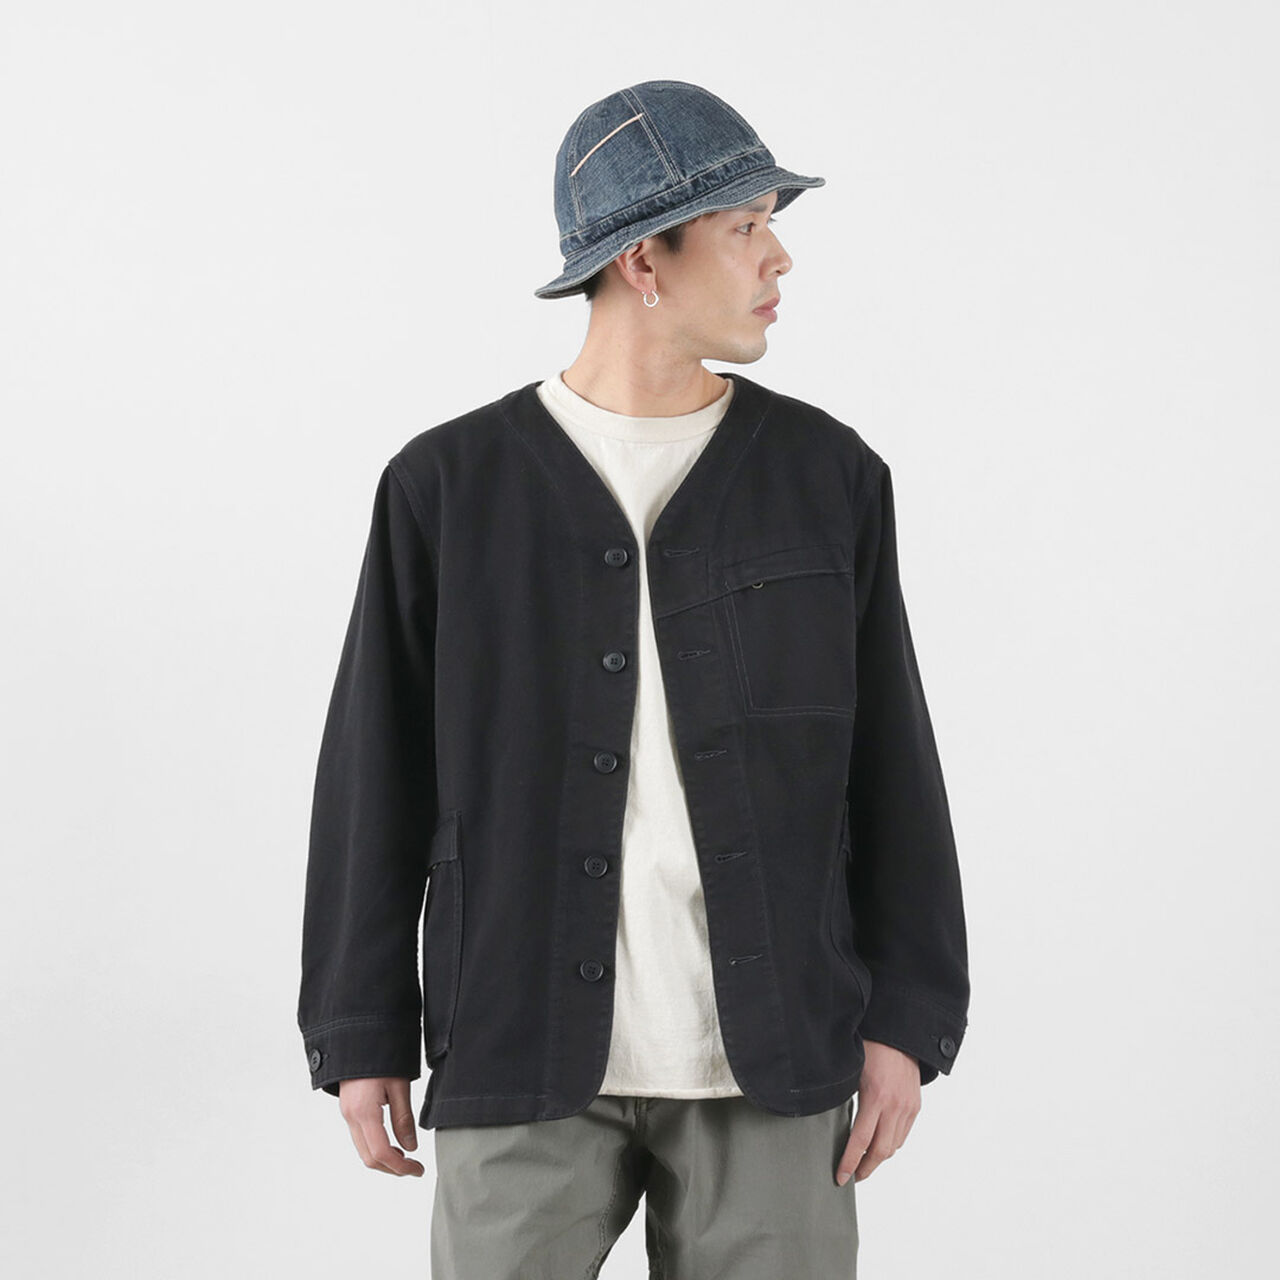 Green Lodge Jacket Hemp Cotton Recycled Polyester Cloth,BlackSole, large image number 0